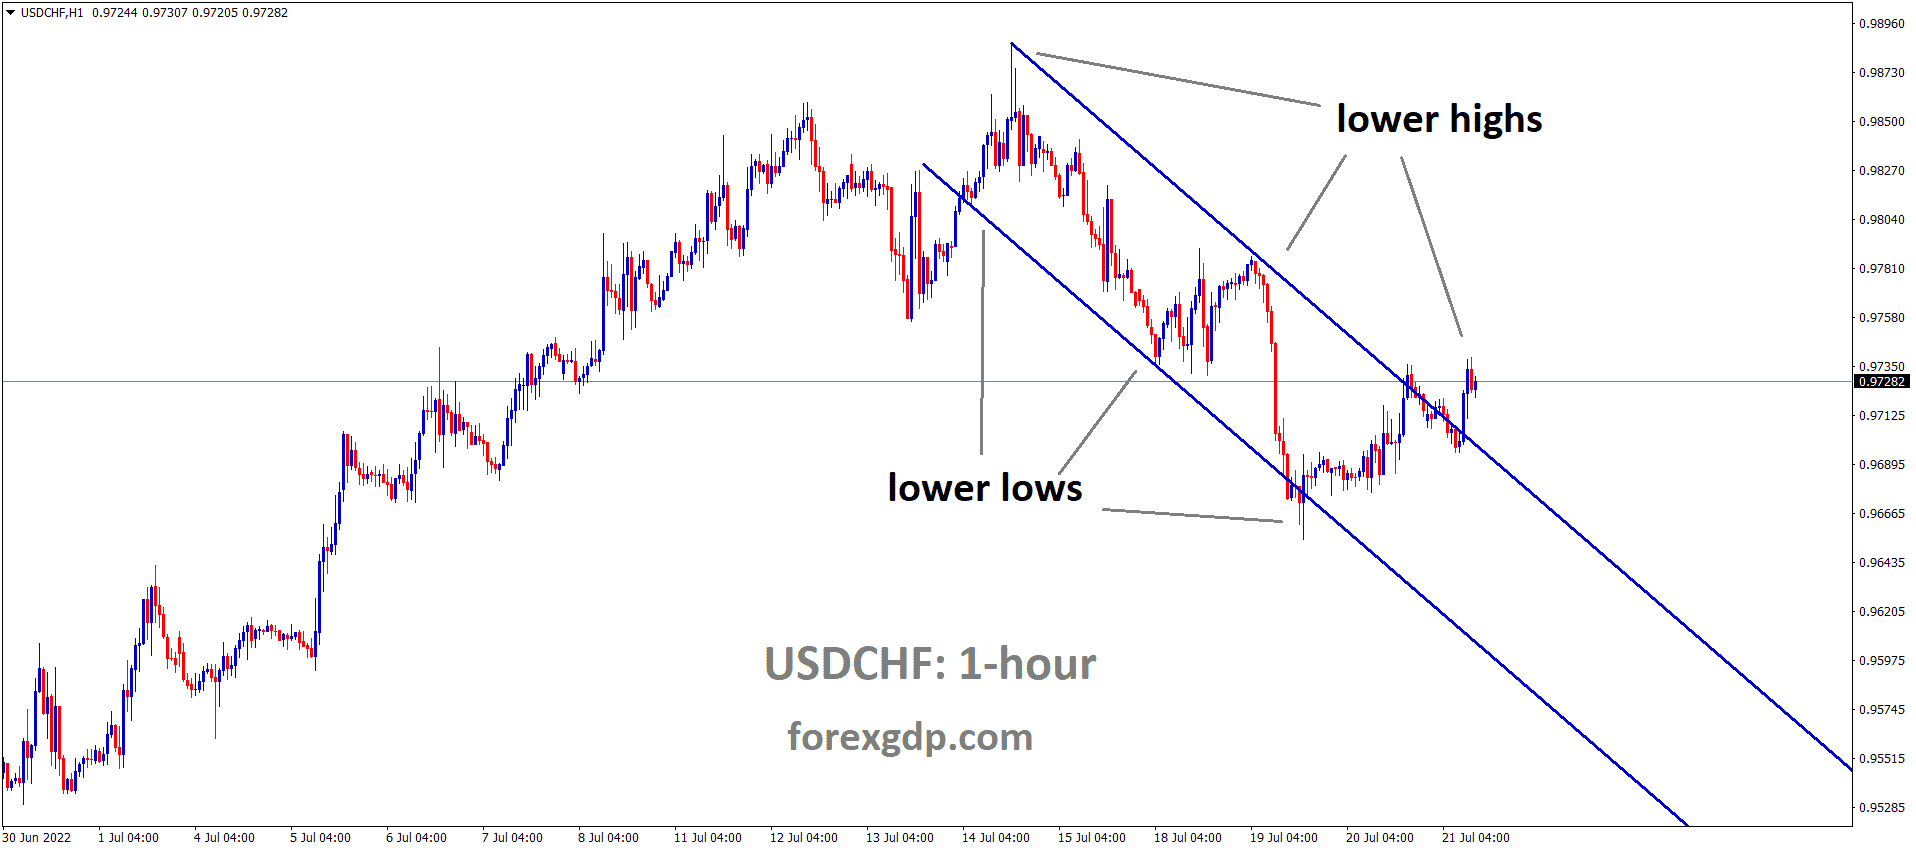 USDCHF is moving in the Descending channel and the market has reached the Lower high area of the channel